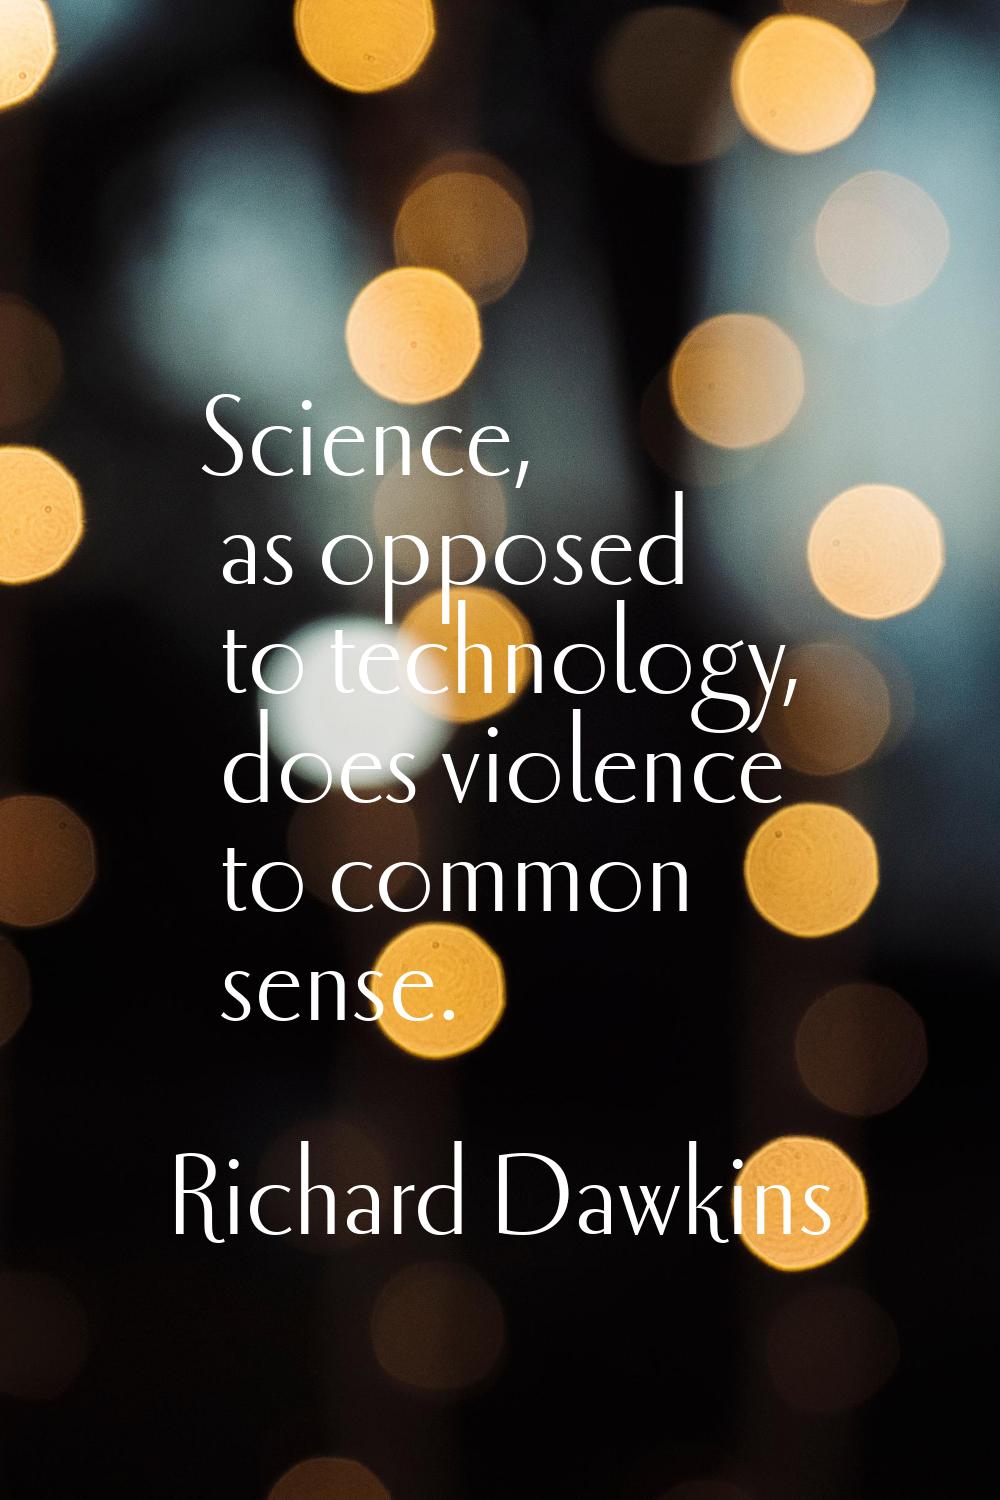 Science, as opposed to technology, does violence to common sense.